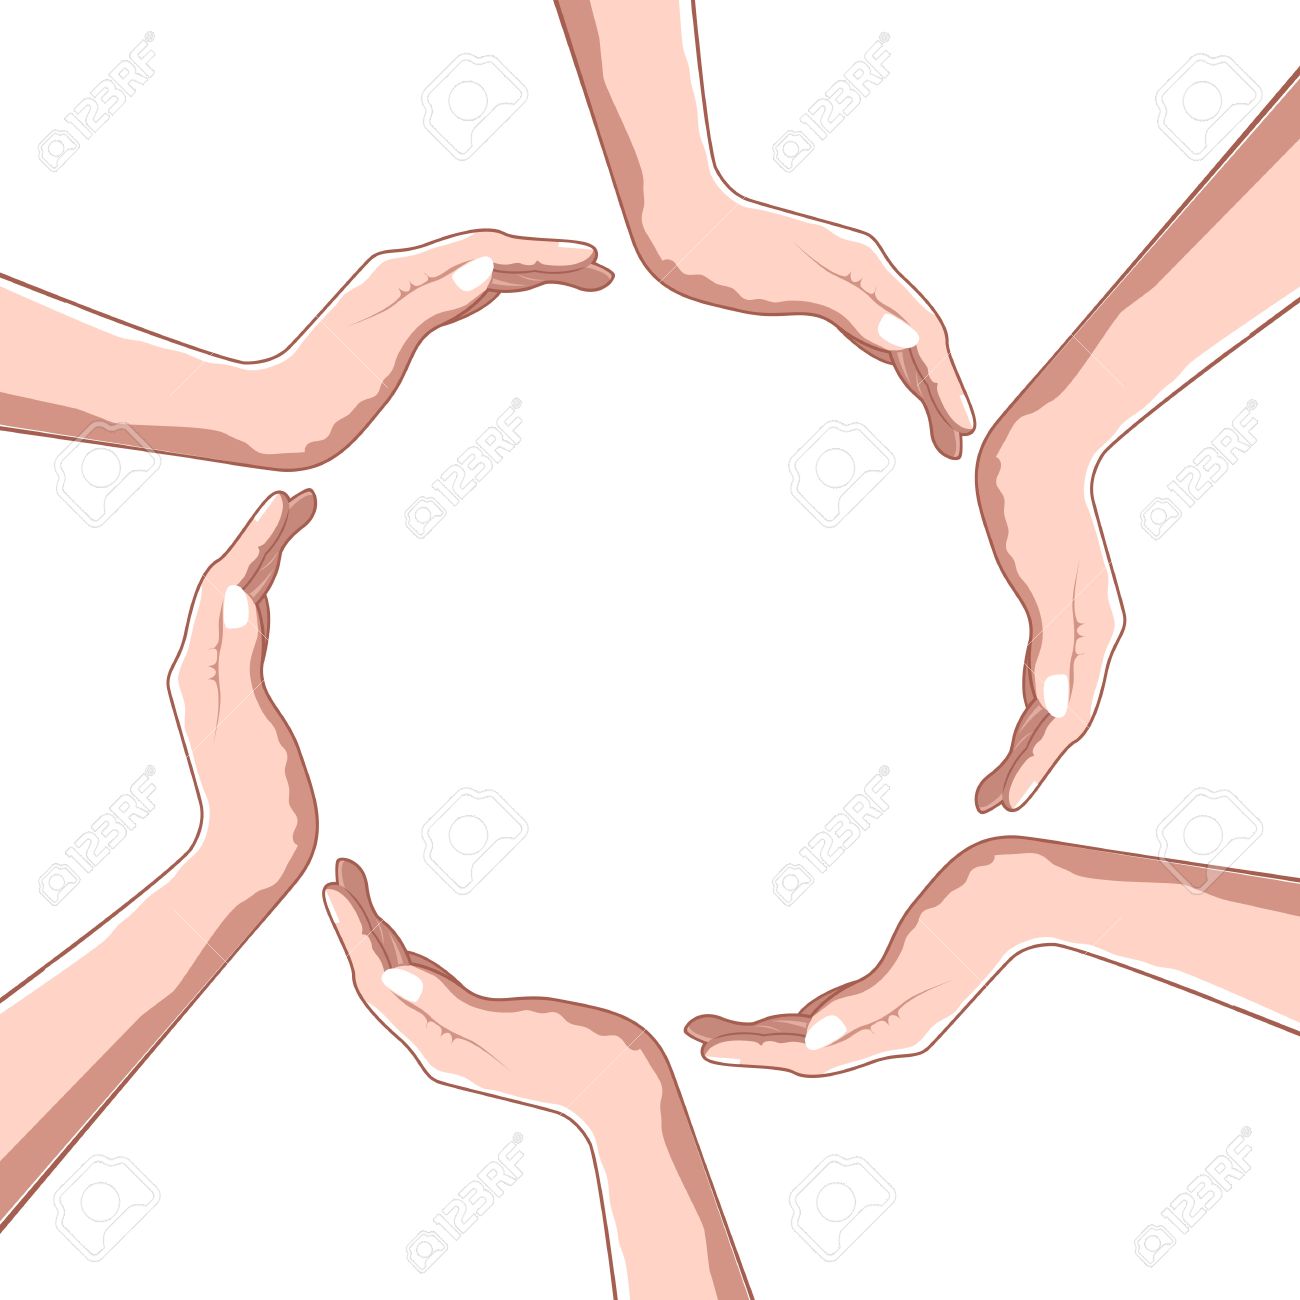 Illustration Of Cooperation With Hands On White Background Royalty